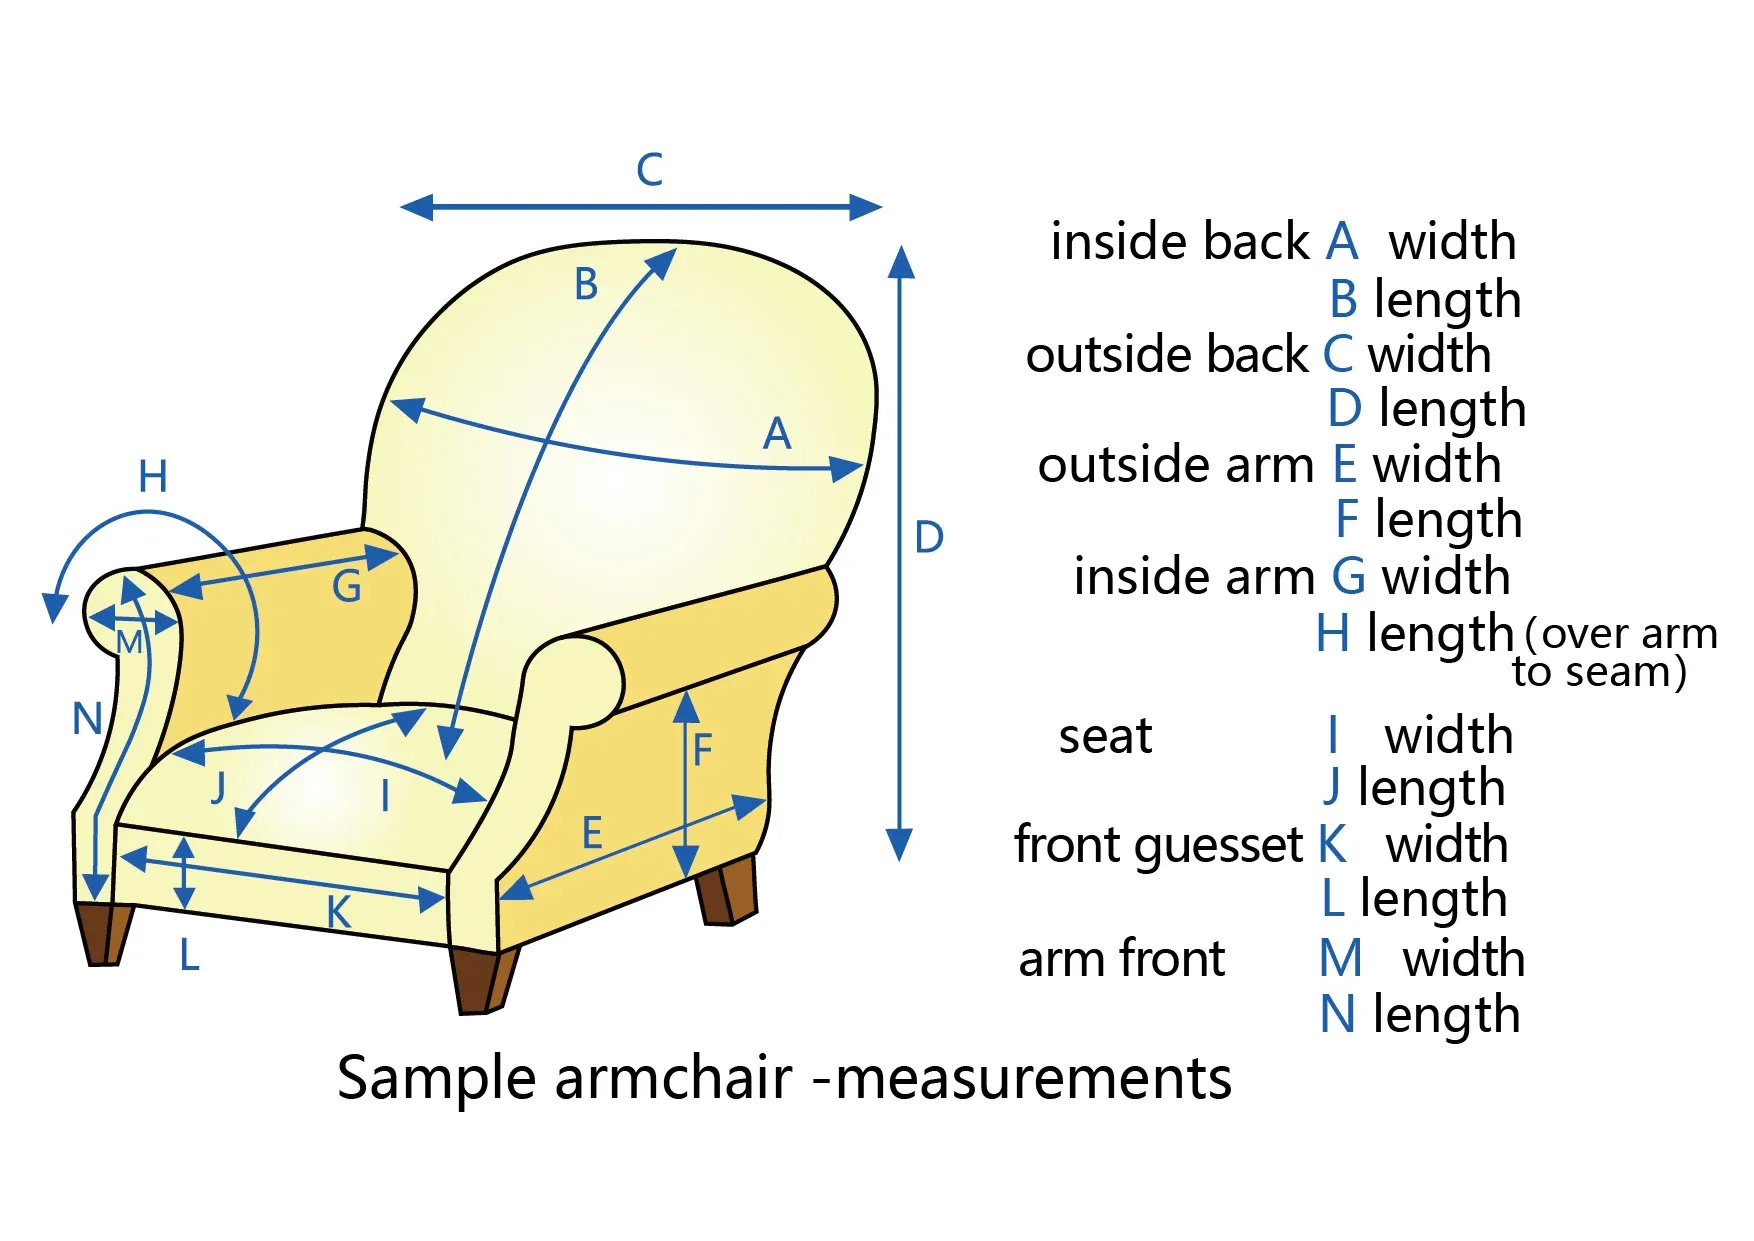 A diagram showing the measurements of an armchair.